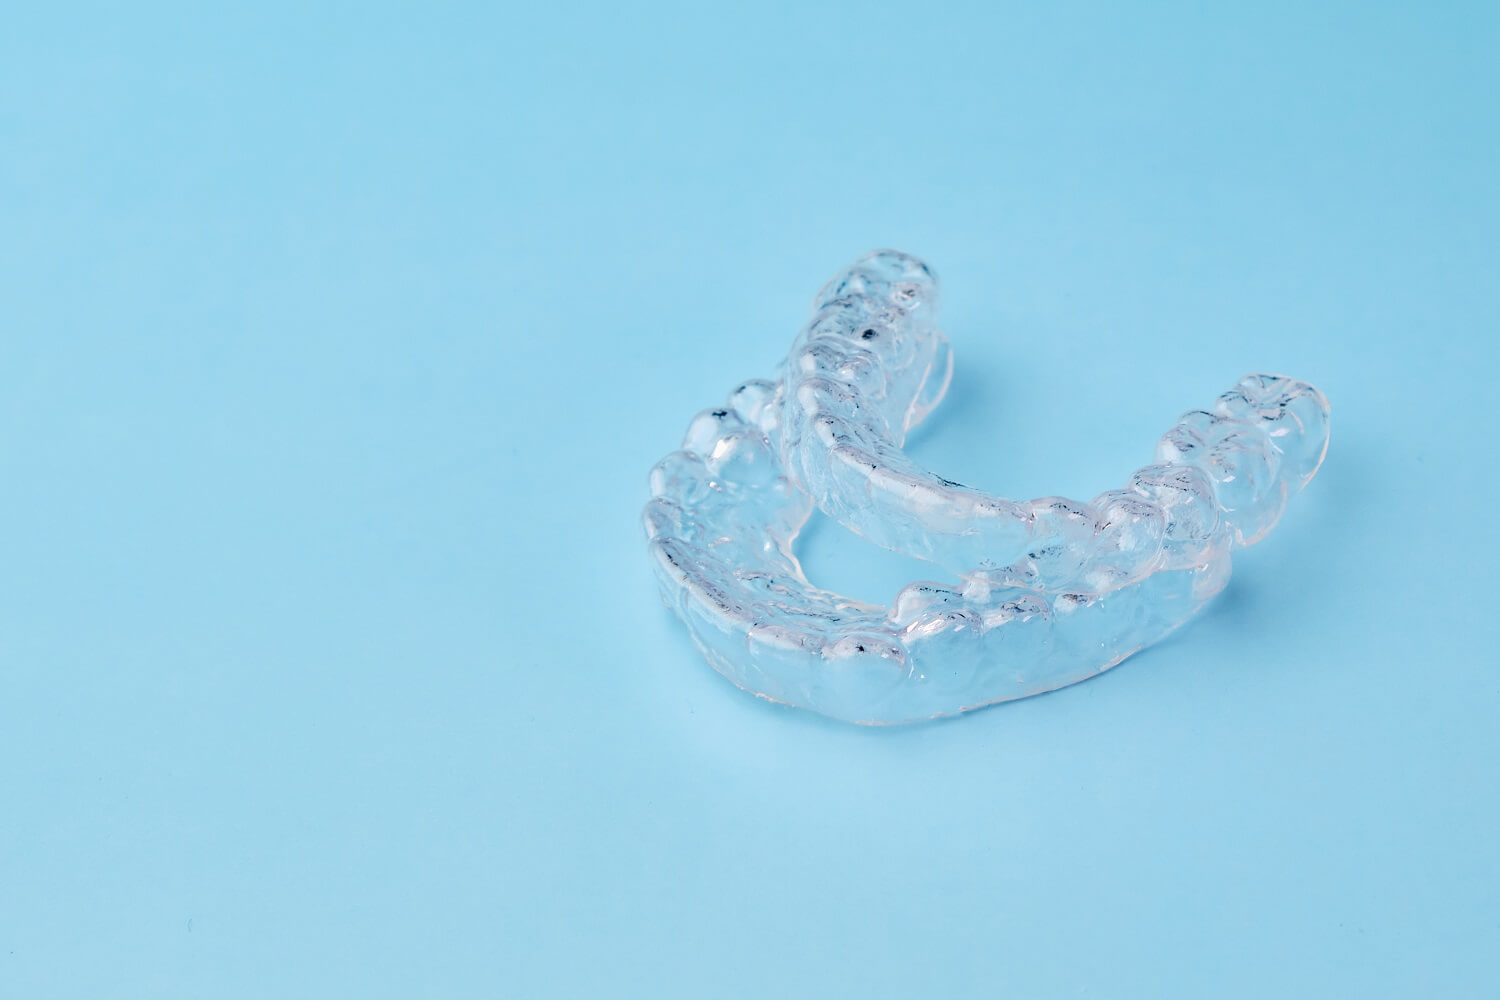 The Benefits of Clear Aligners